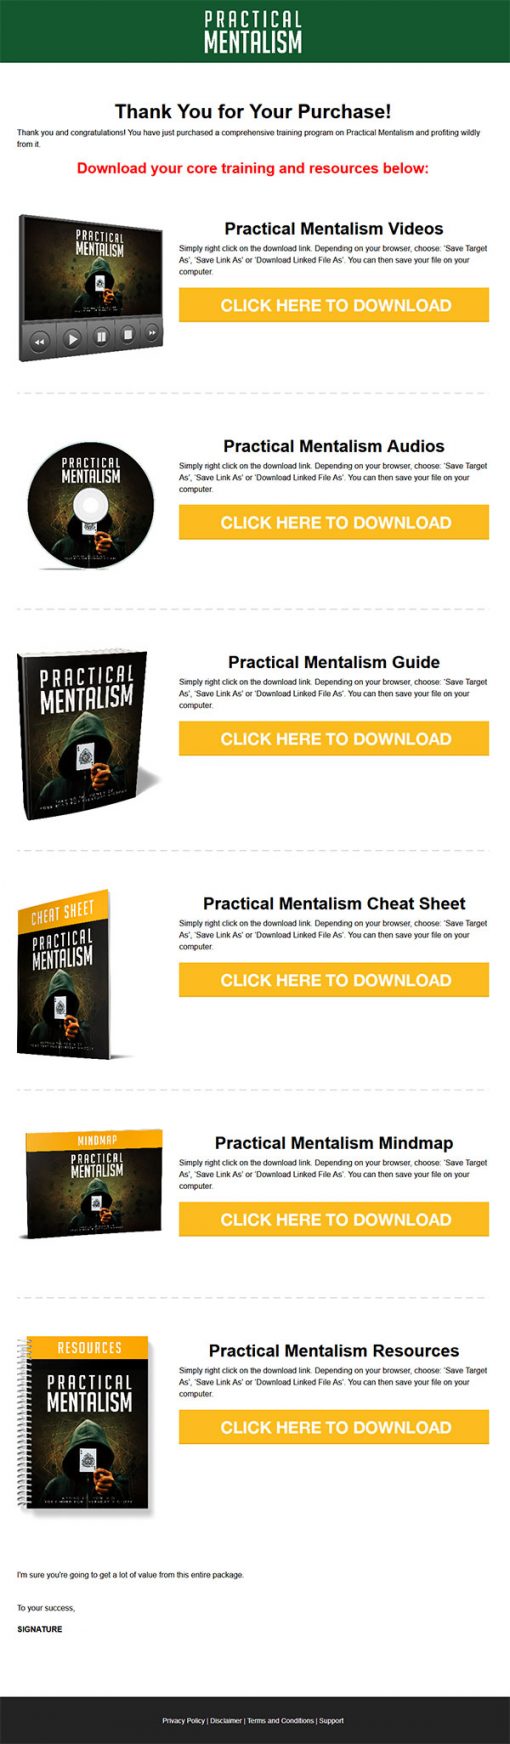 Practical Mentalism Ebook and Videos MRR